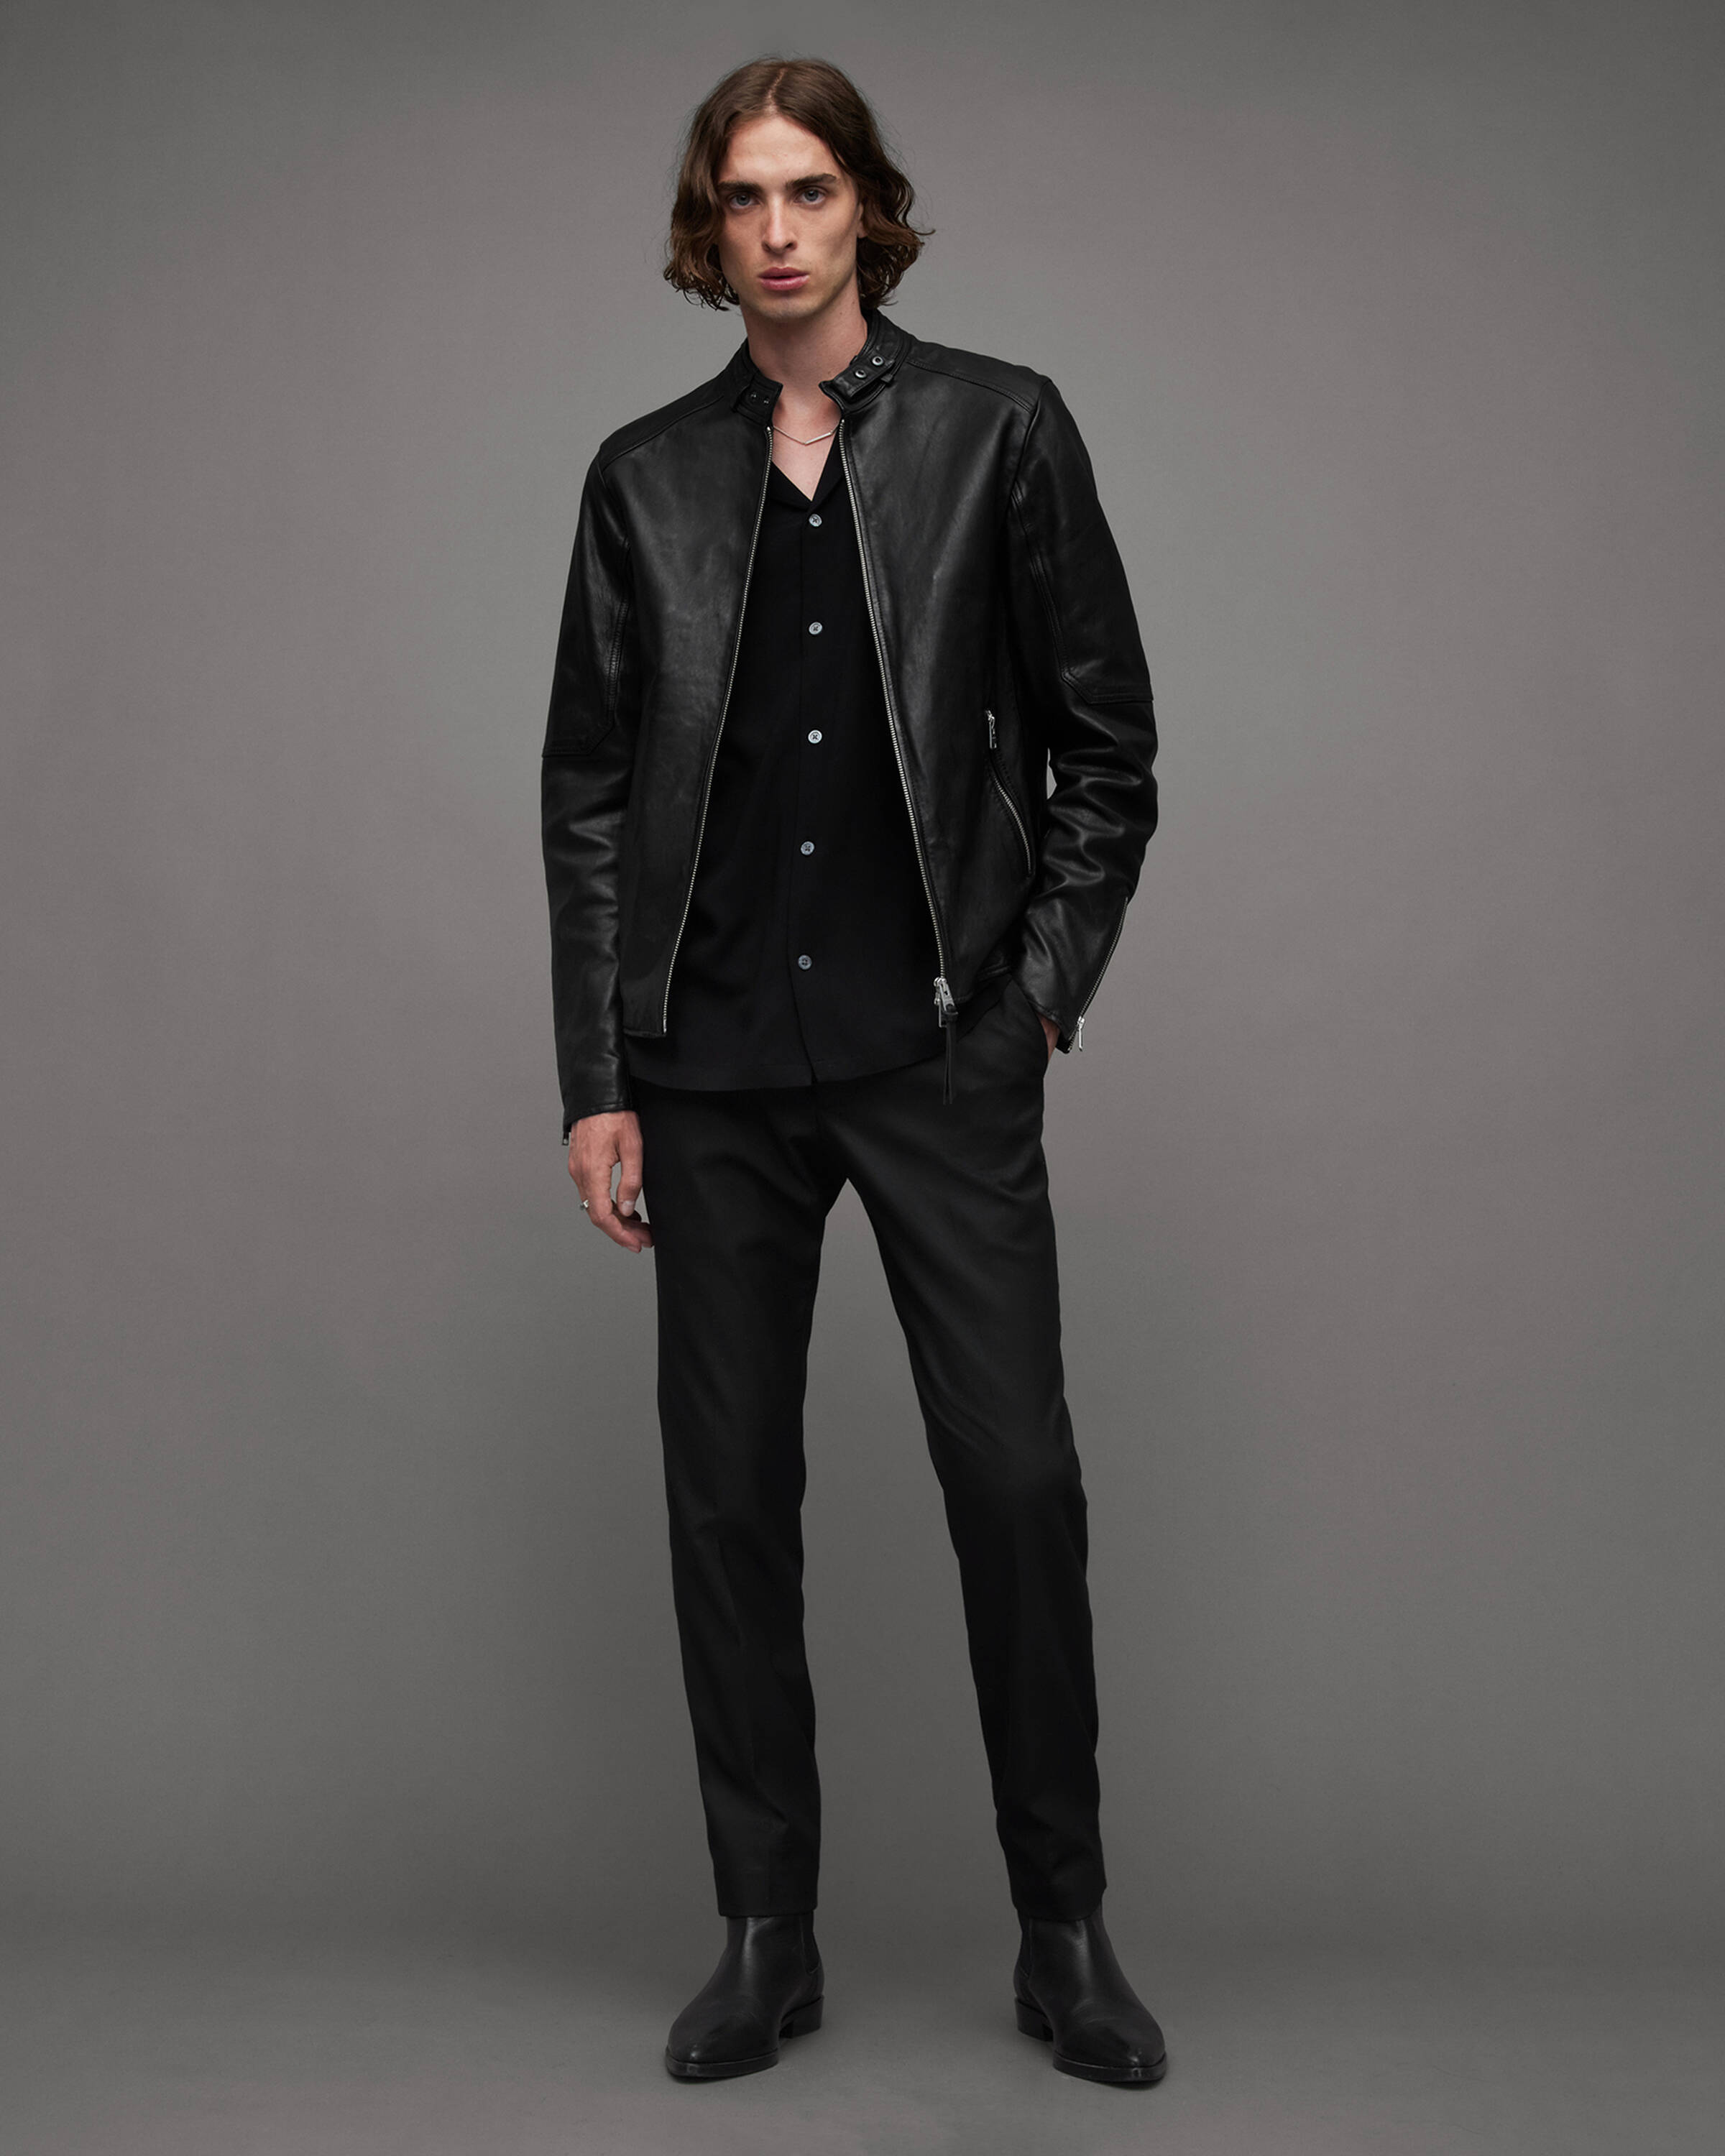 Man's Guide to Leather Jackets